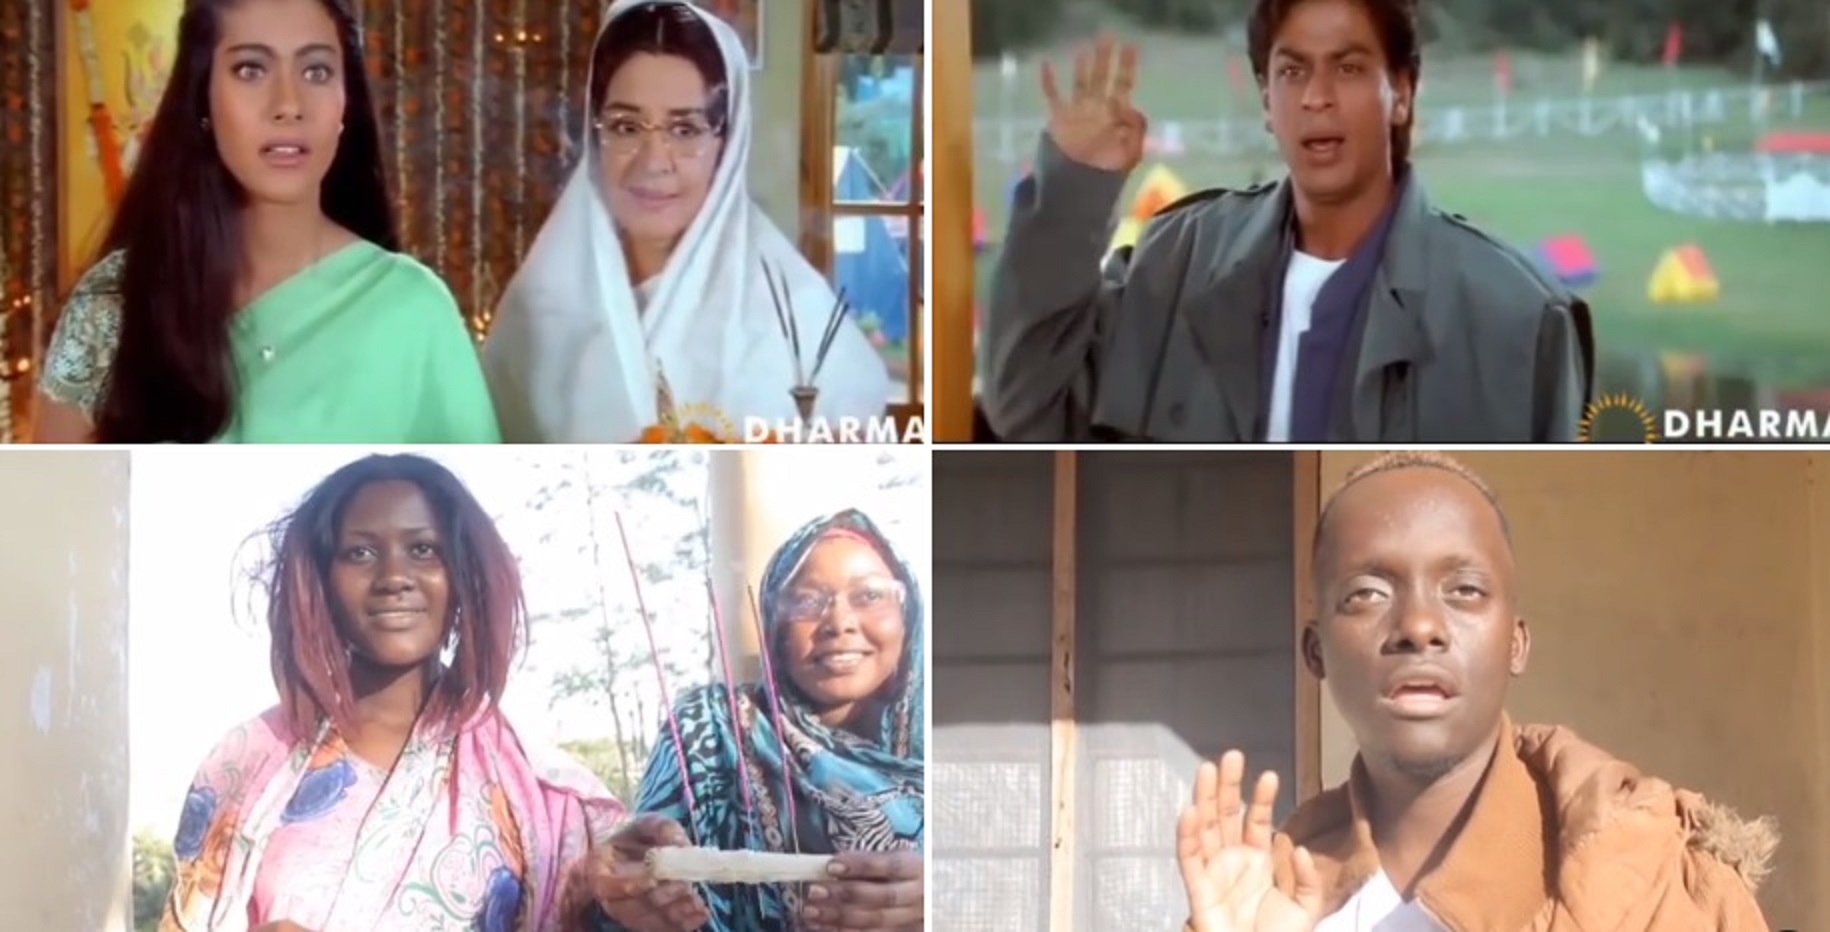 East African Bollywood Fans Recreate Iconic ‘Kuch Kuch Hota Hai’ Scene in Viral Video